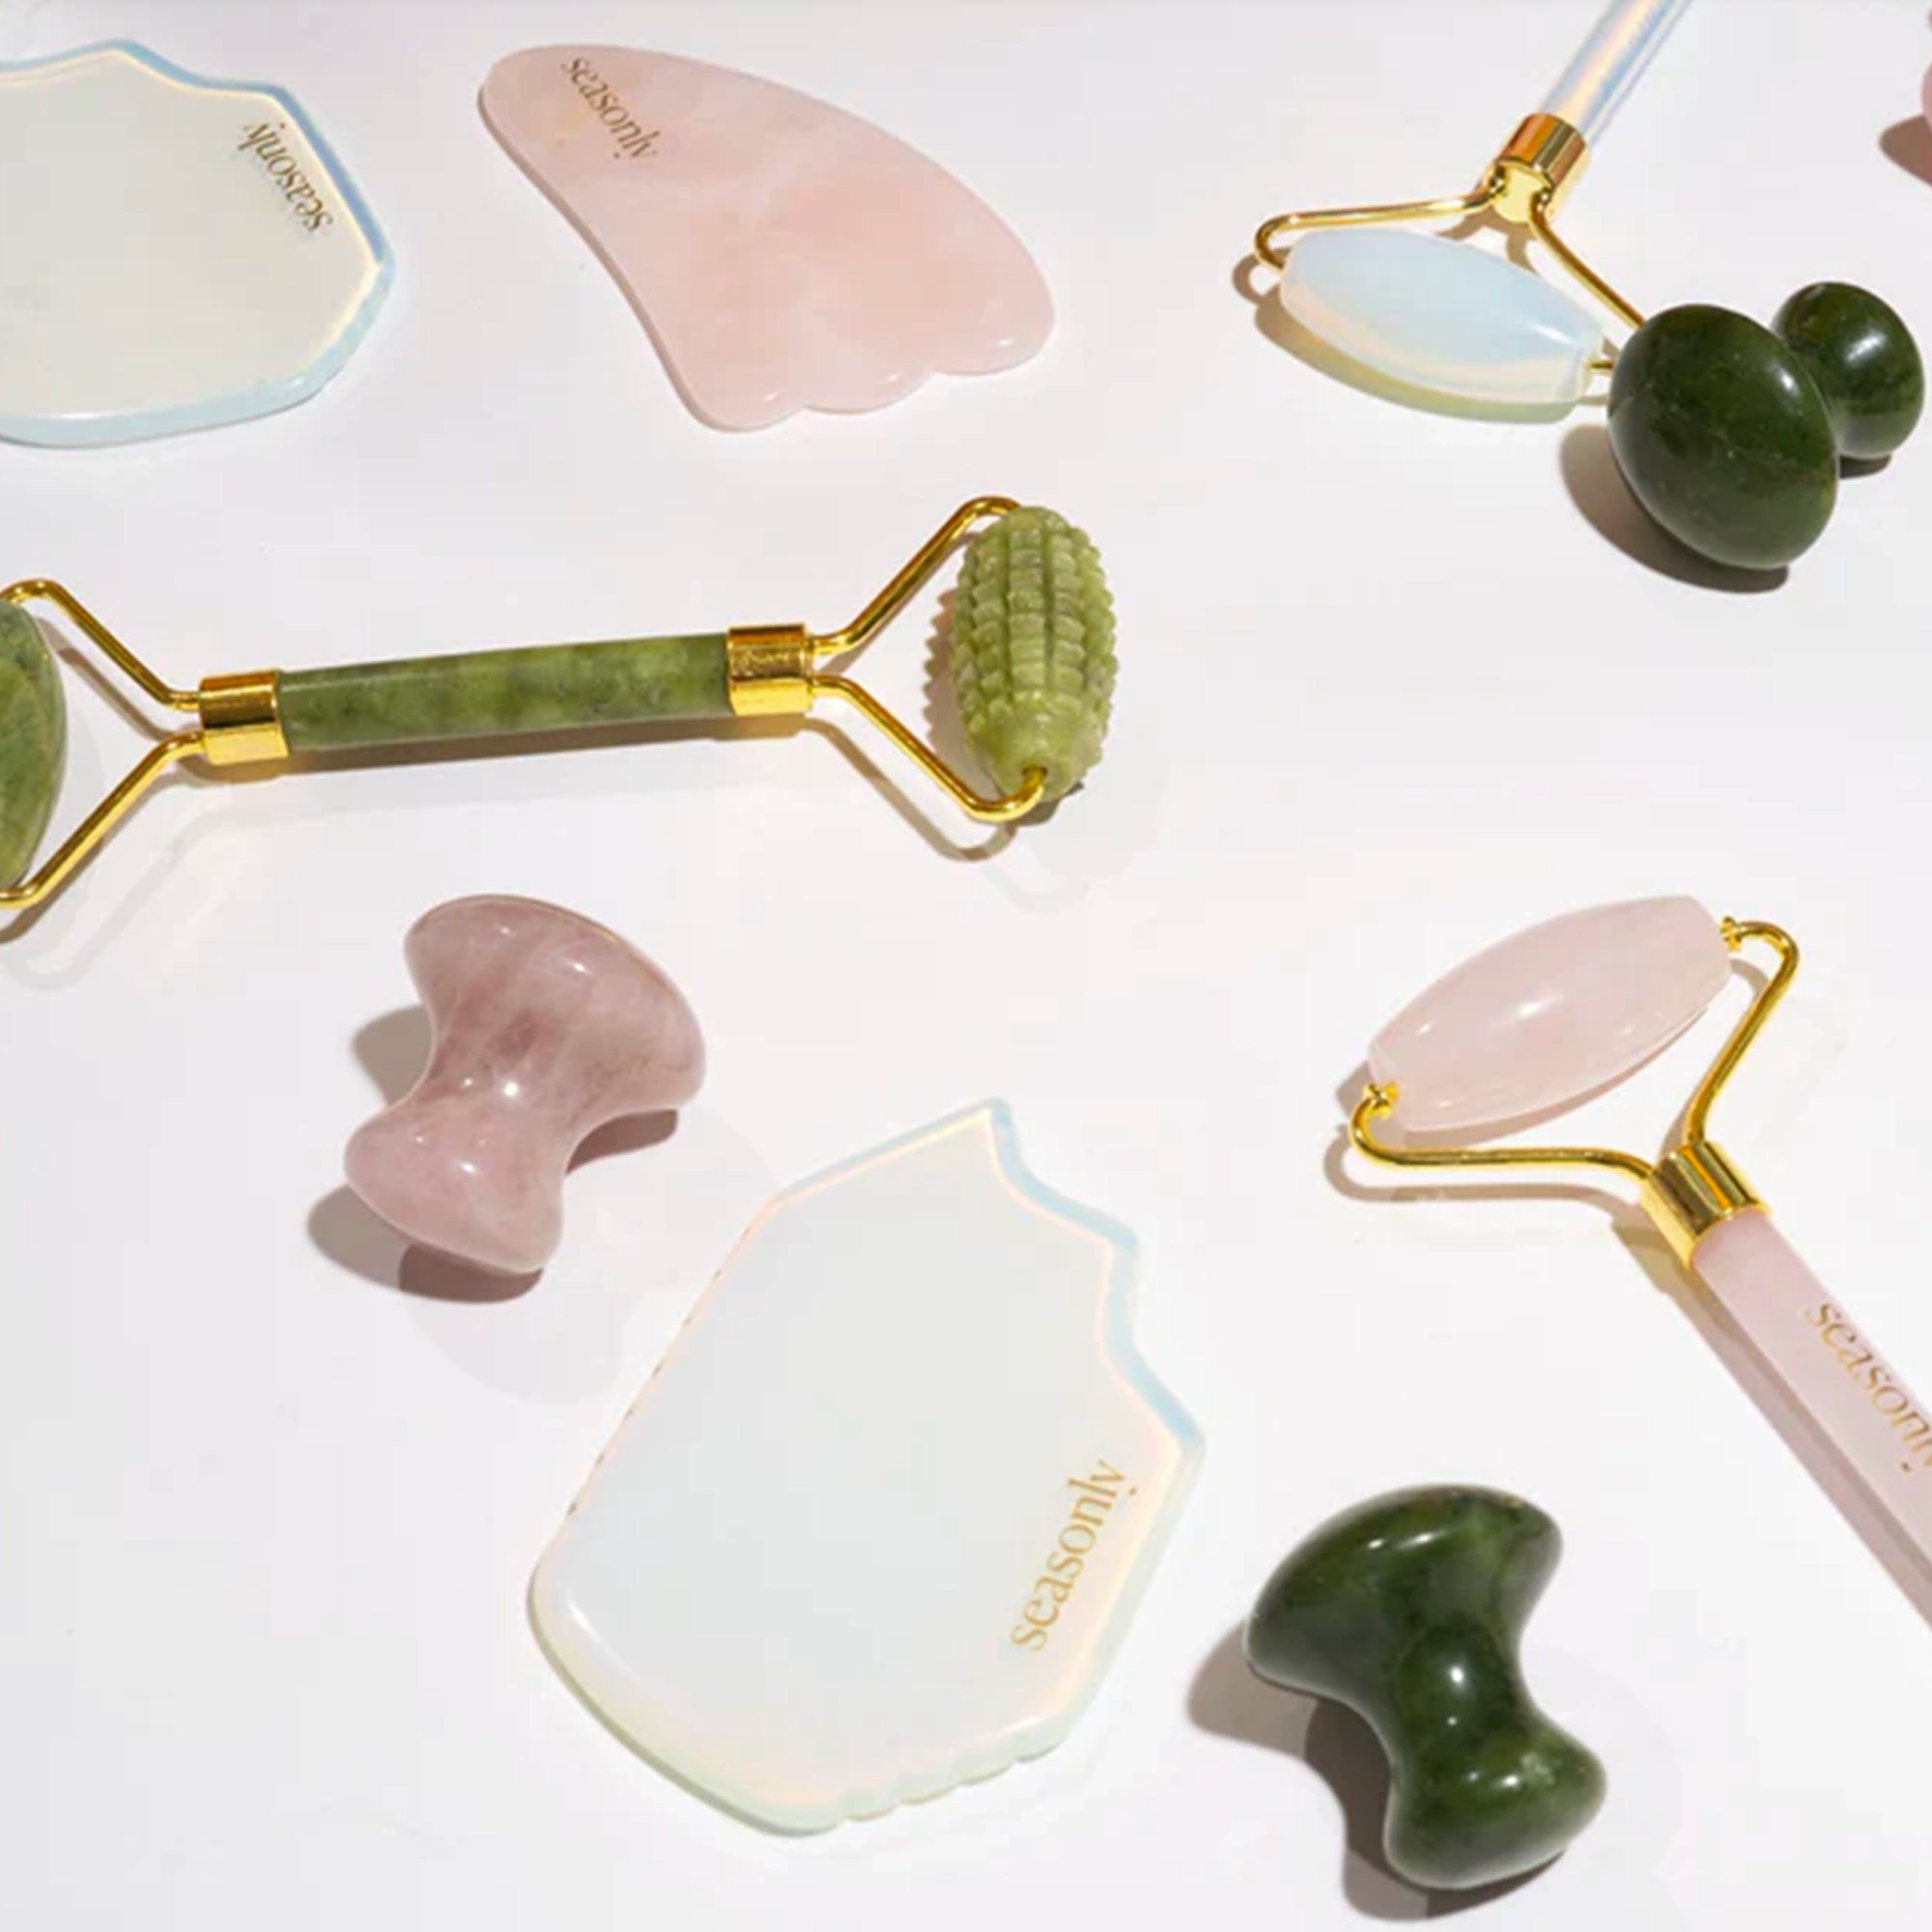 The opal gua sha for an introduction to facial massage